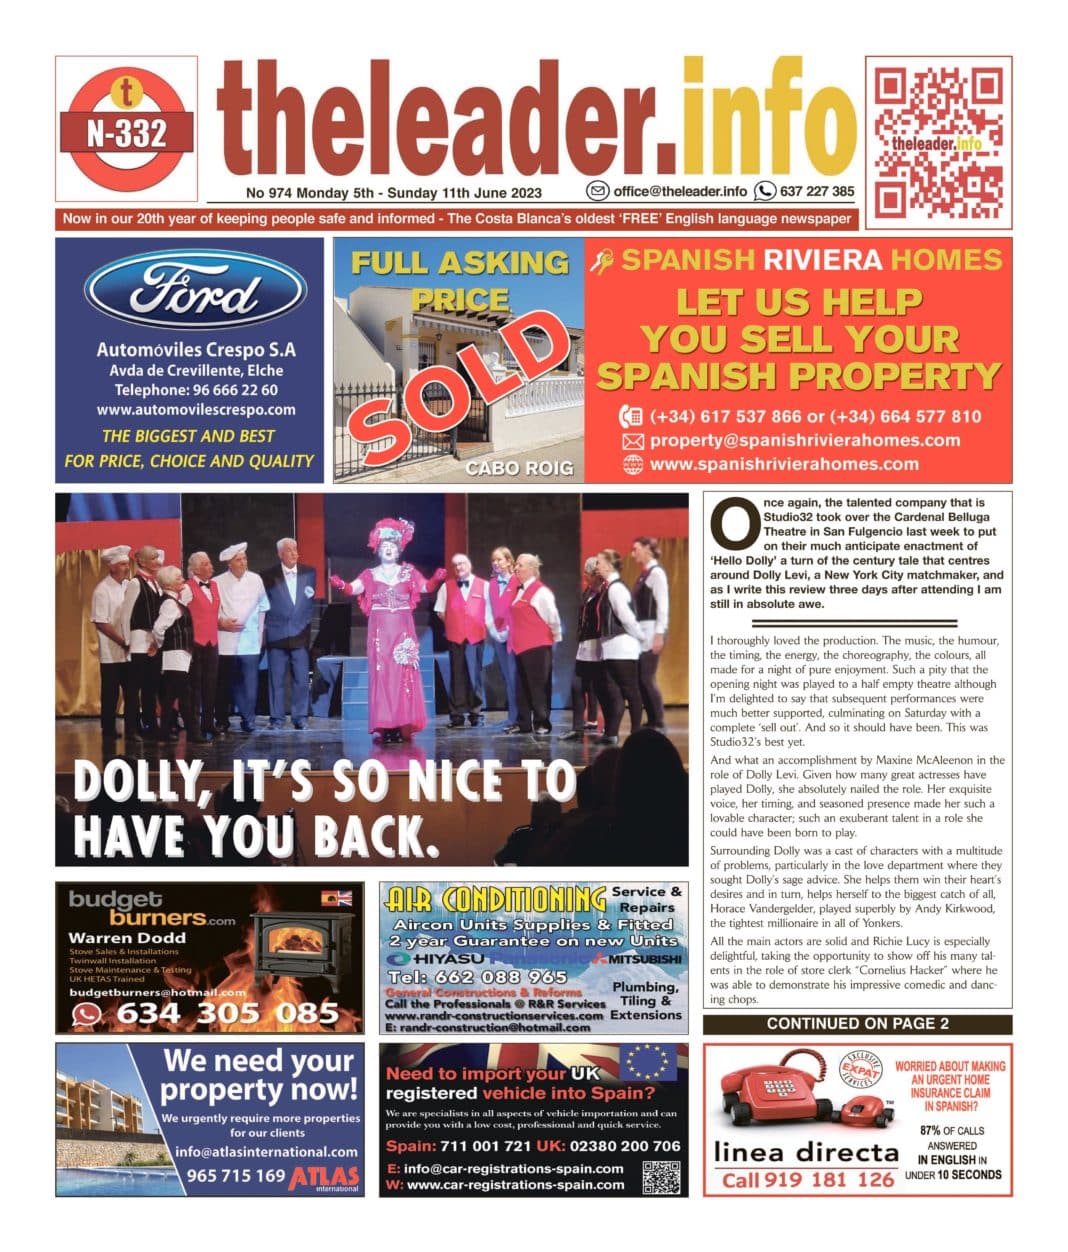 The Leader Newspaper 5 June 23 – Edition 974